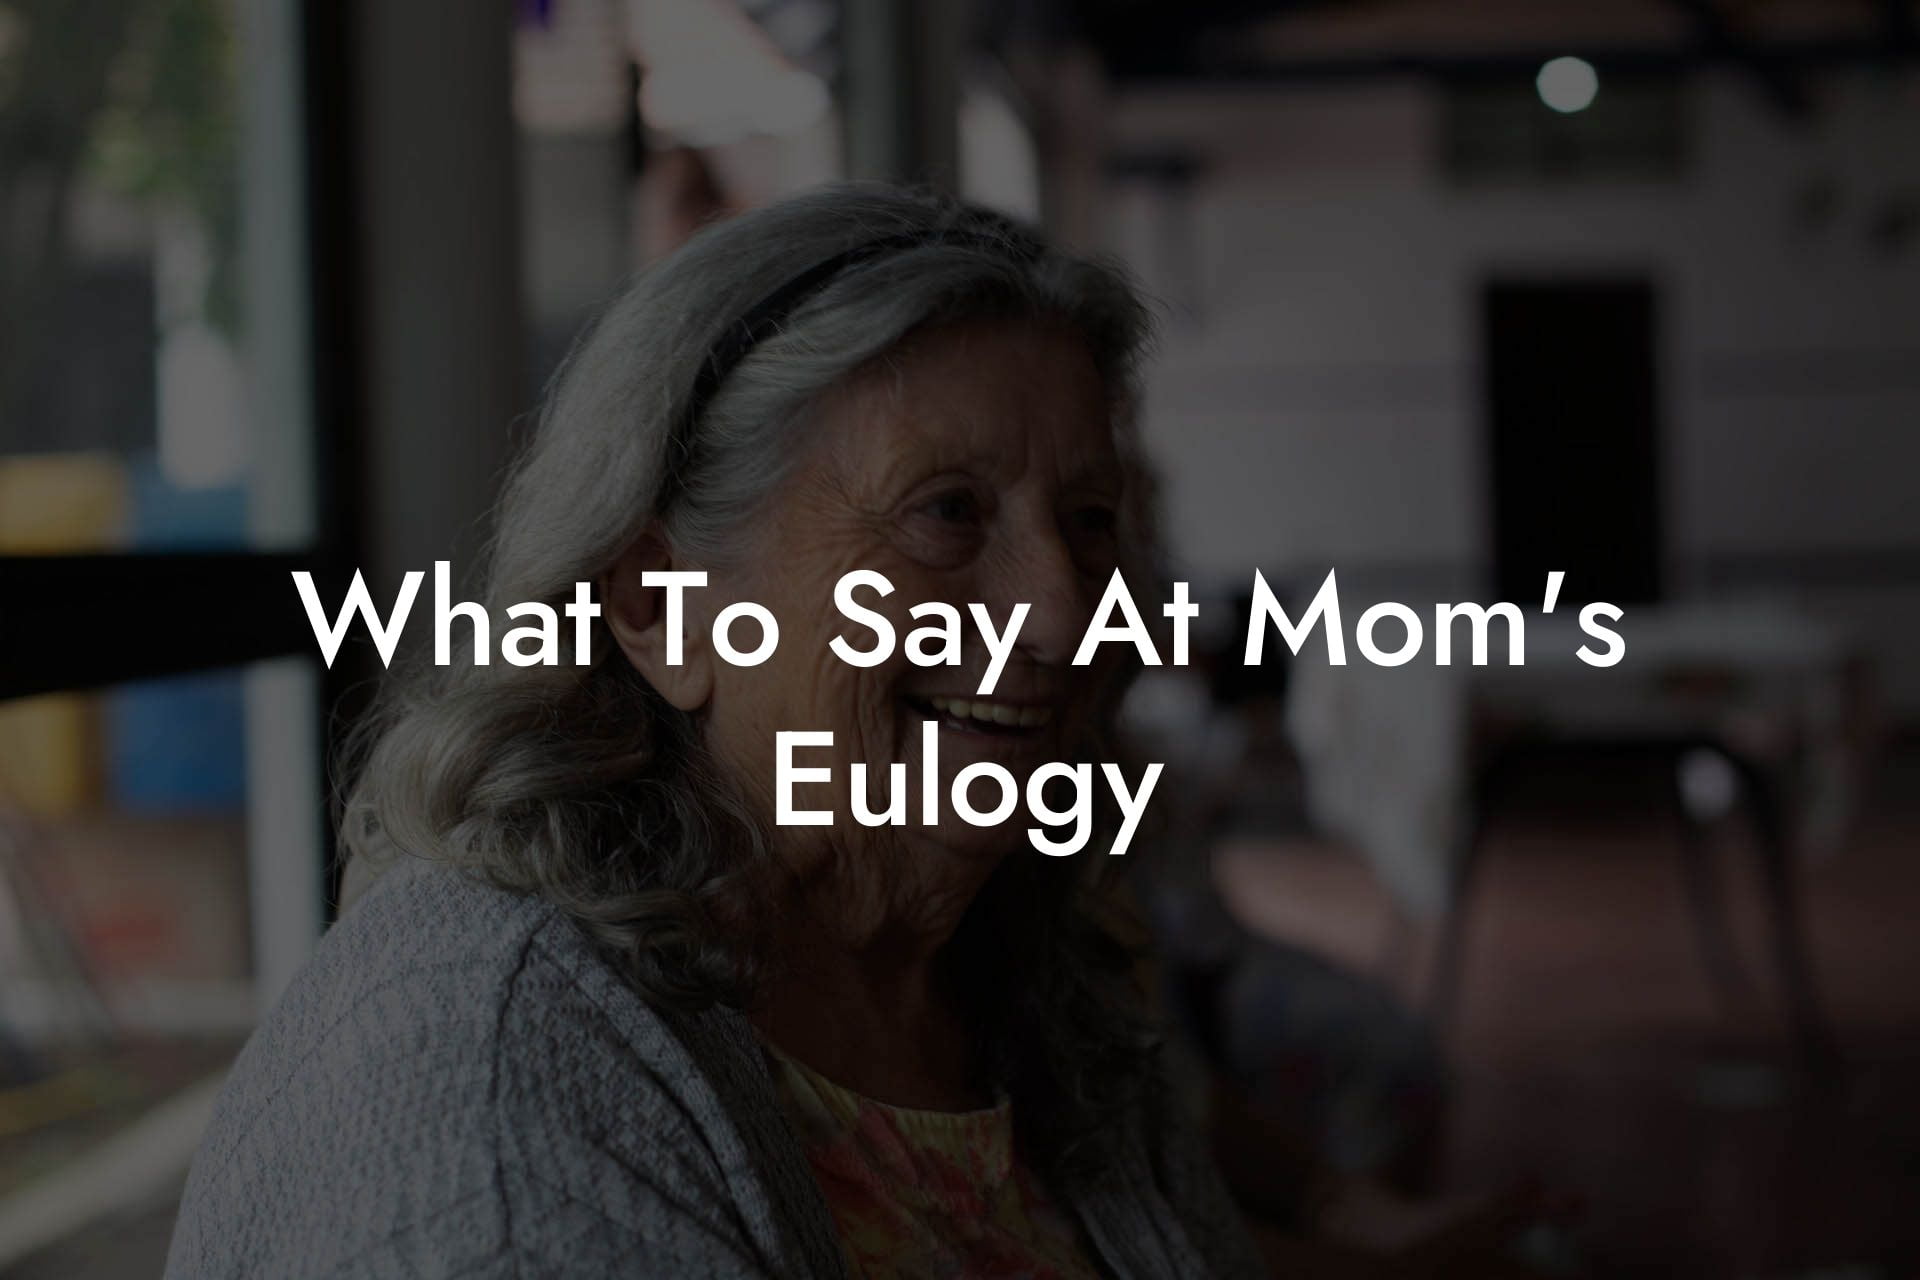 What To Say At Mom's Eulogy